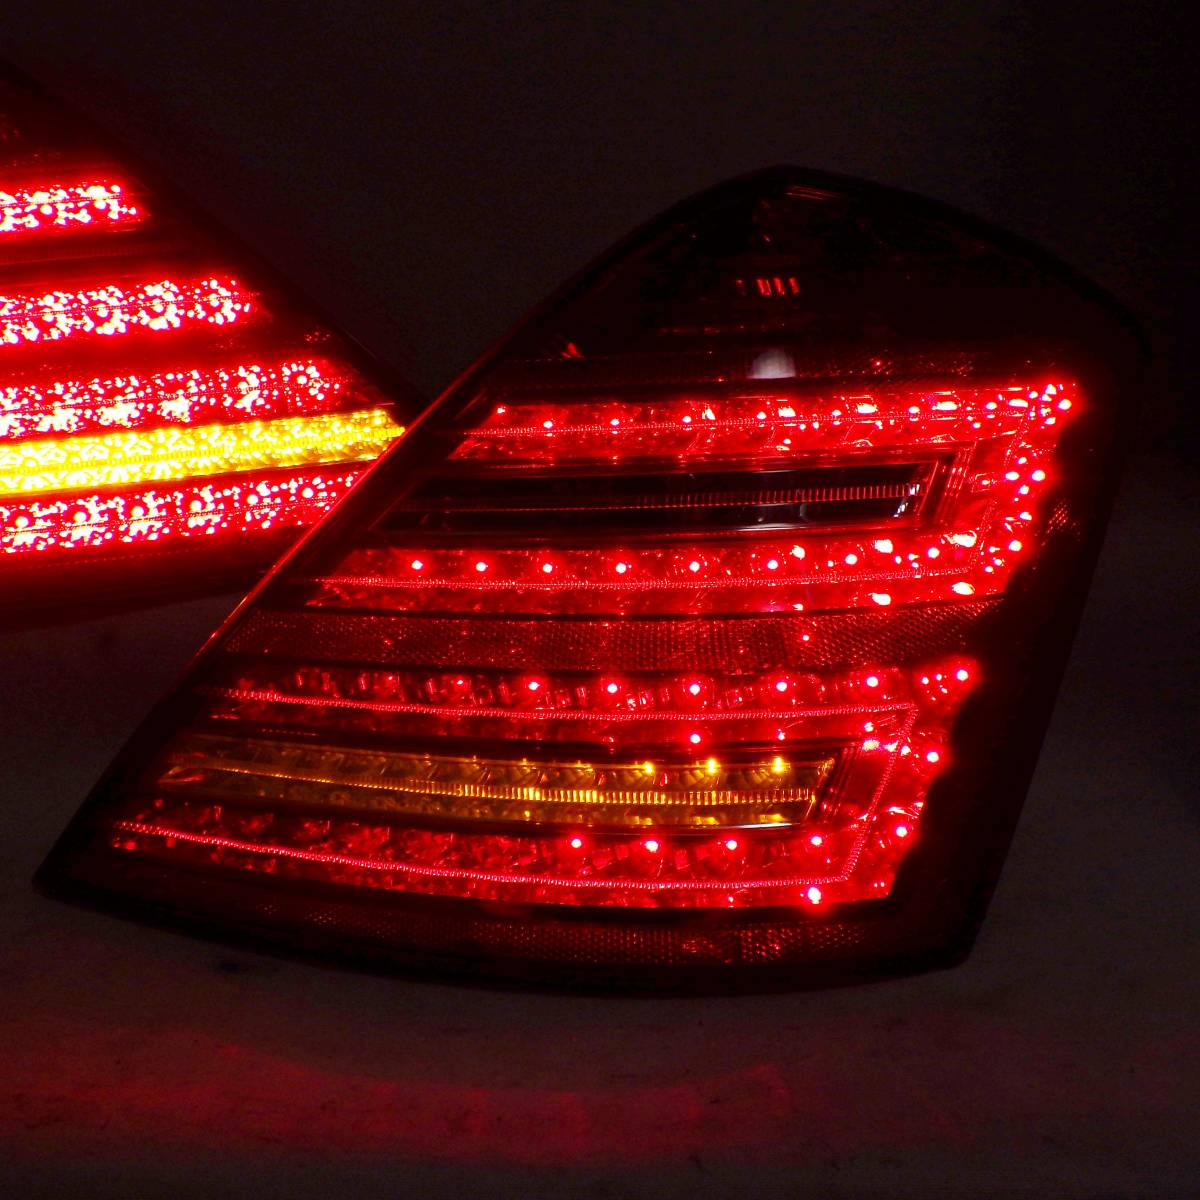  lighting verification settled vehicle inspection correspondence Mercedes Benz S Class W221 for previous term tail lamp tale lense latter term look S350/S500/S550/S600/AMG S63/AMG S65